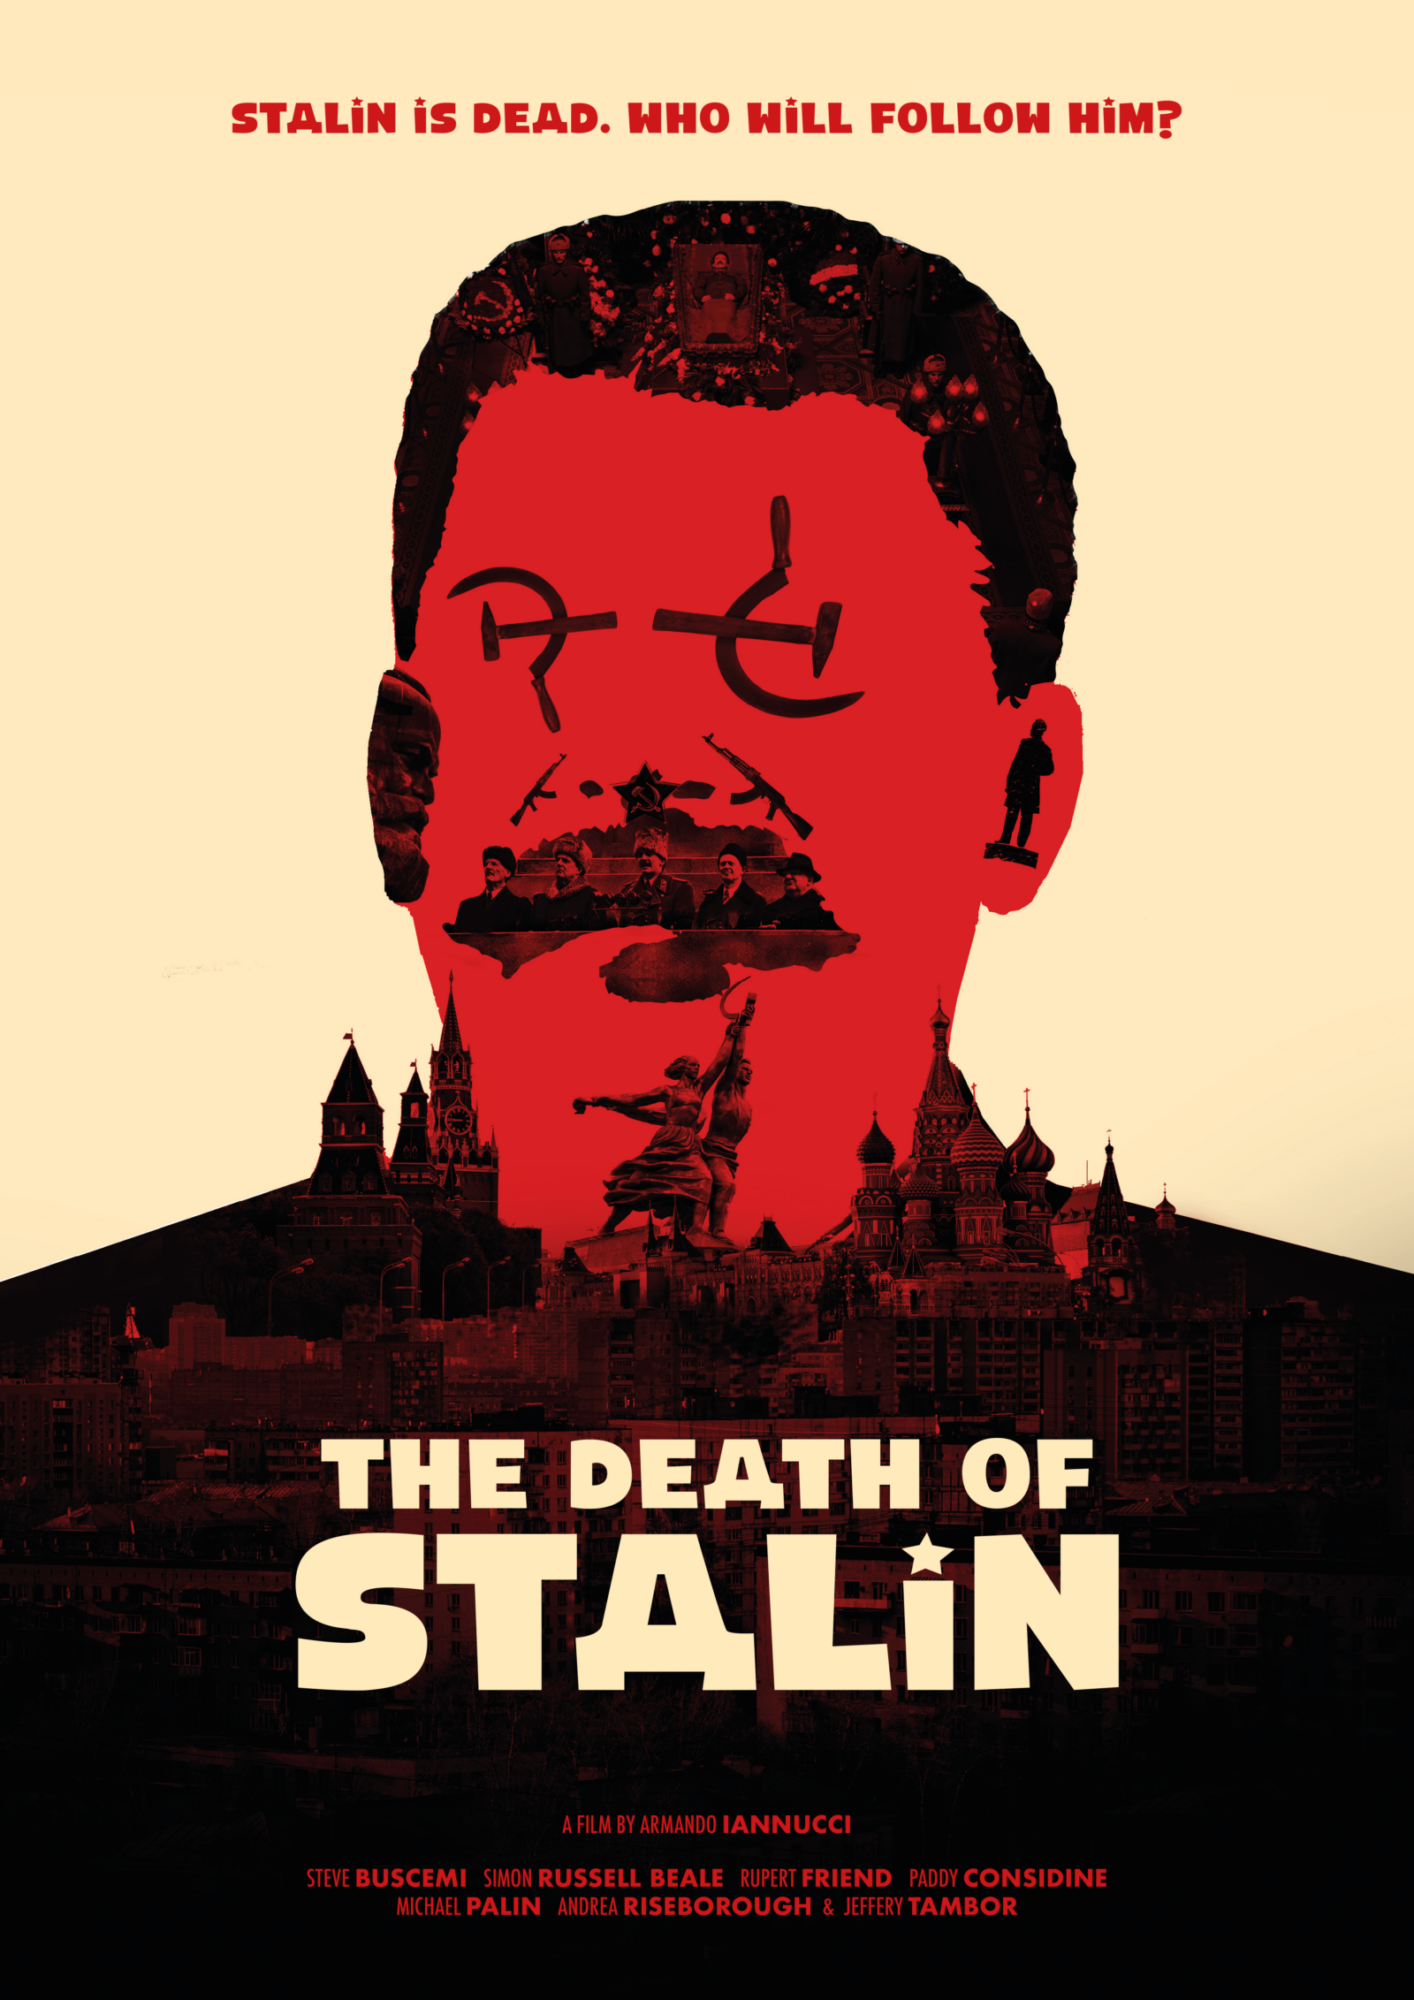 Death of stalin. Stalin Dead. The Death of Stalin. The Death of Stalin (2017).